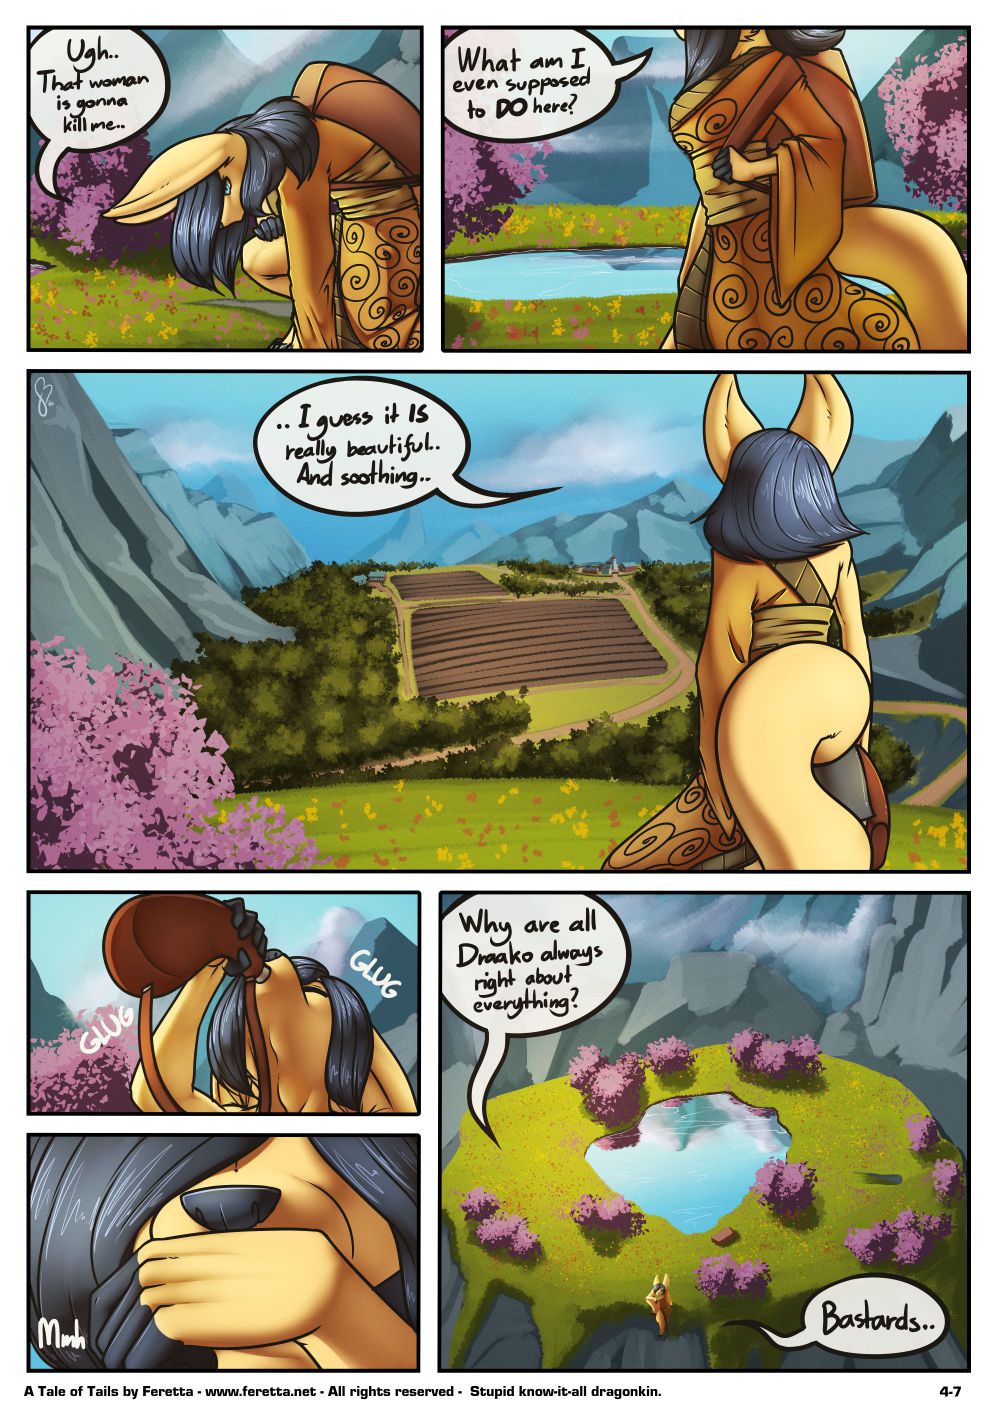 [Feretta] Farellian Legends: A Tale of Tails (w/Extras) [Ongoing] 157